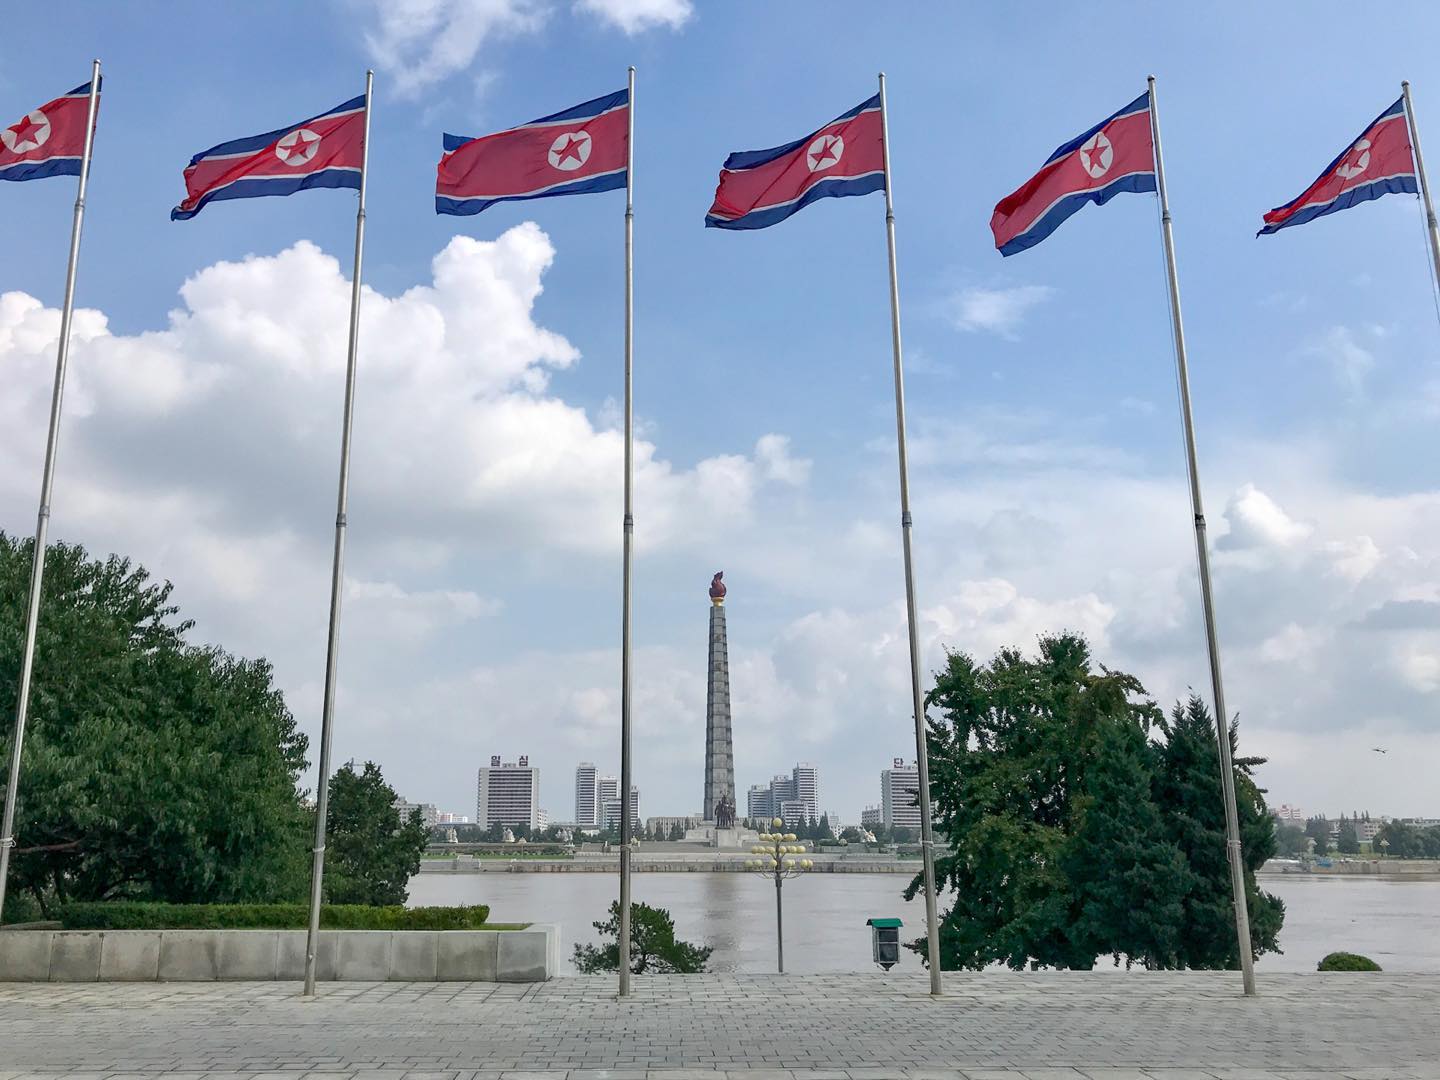 Pyongyang, North Korea 🇰🇵.
.
Looking across the Taedong River to the Juche Tower from Kim Il Sung square. Unfortunately the views from the top of the Juche Tower were covered in cloud when we were there the day before due to the typhoon hitting us. If there is one thing the North Koreans love its very tall flag poles all in a row. 
.
#travel #dprk #korea #pyongyang #traveller #offthebeatenpath #explore #backpacker #travelling #instatravel #northkorea #juchetower #backpacking #travelgram #youngpioneer #travelholic #instaphoto #adventure #northkoreatravel #ypt